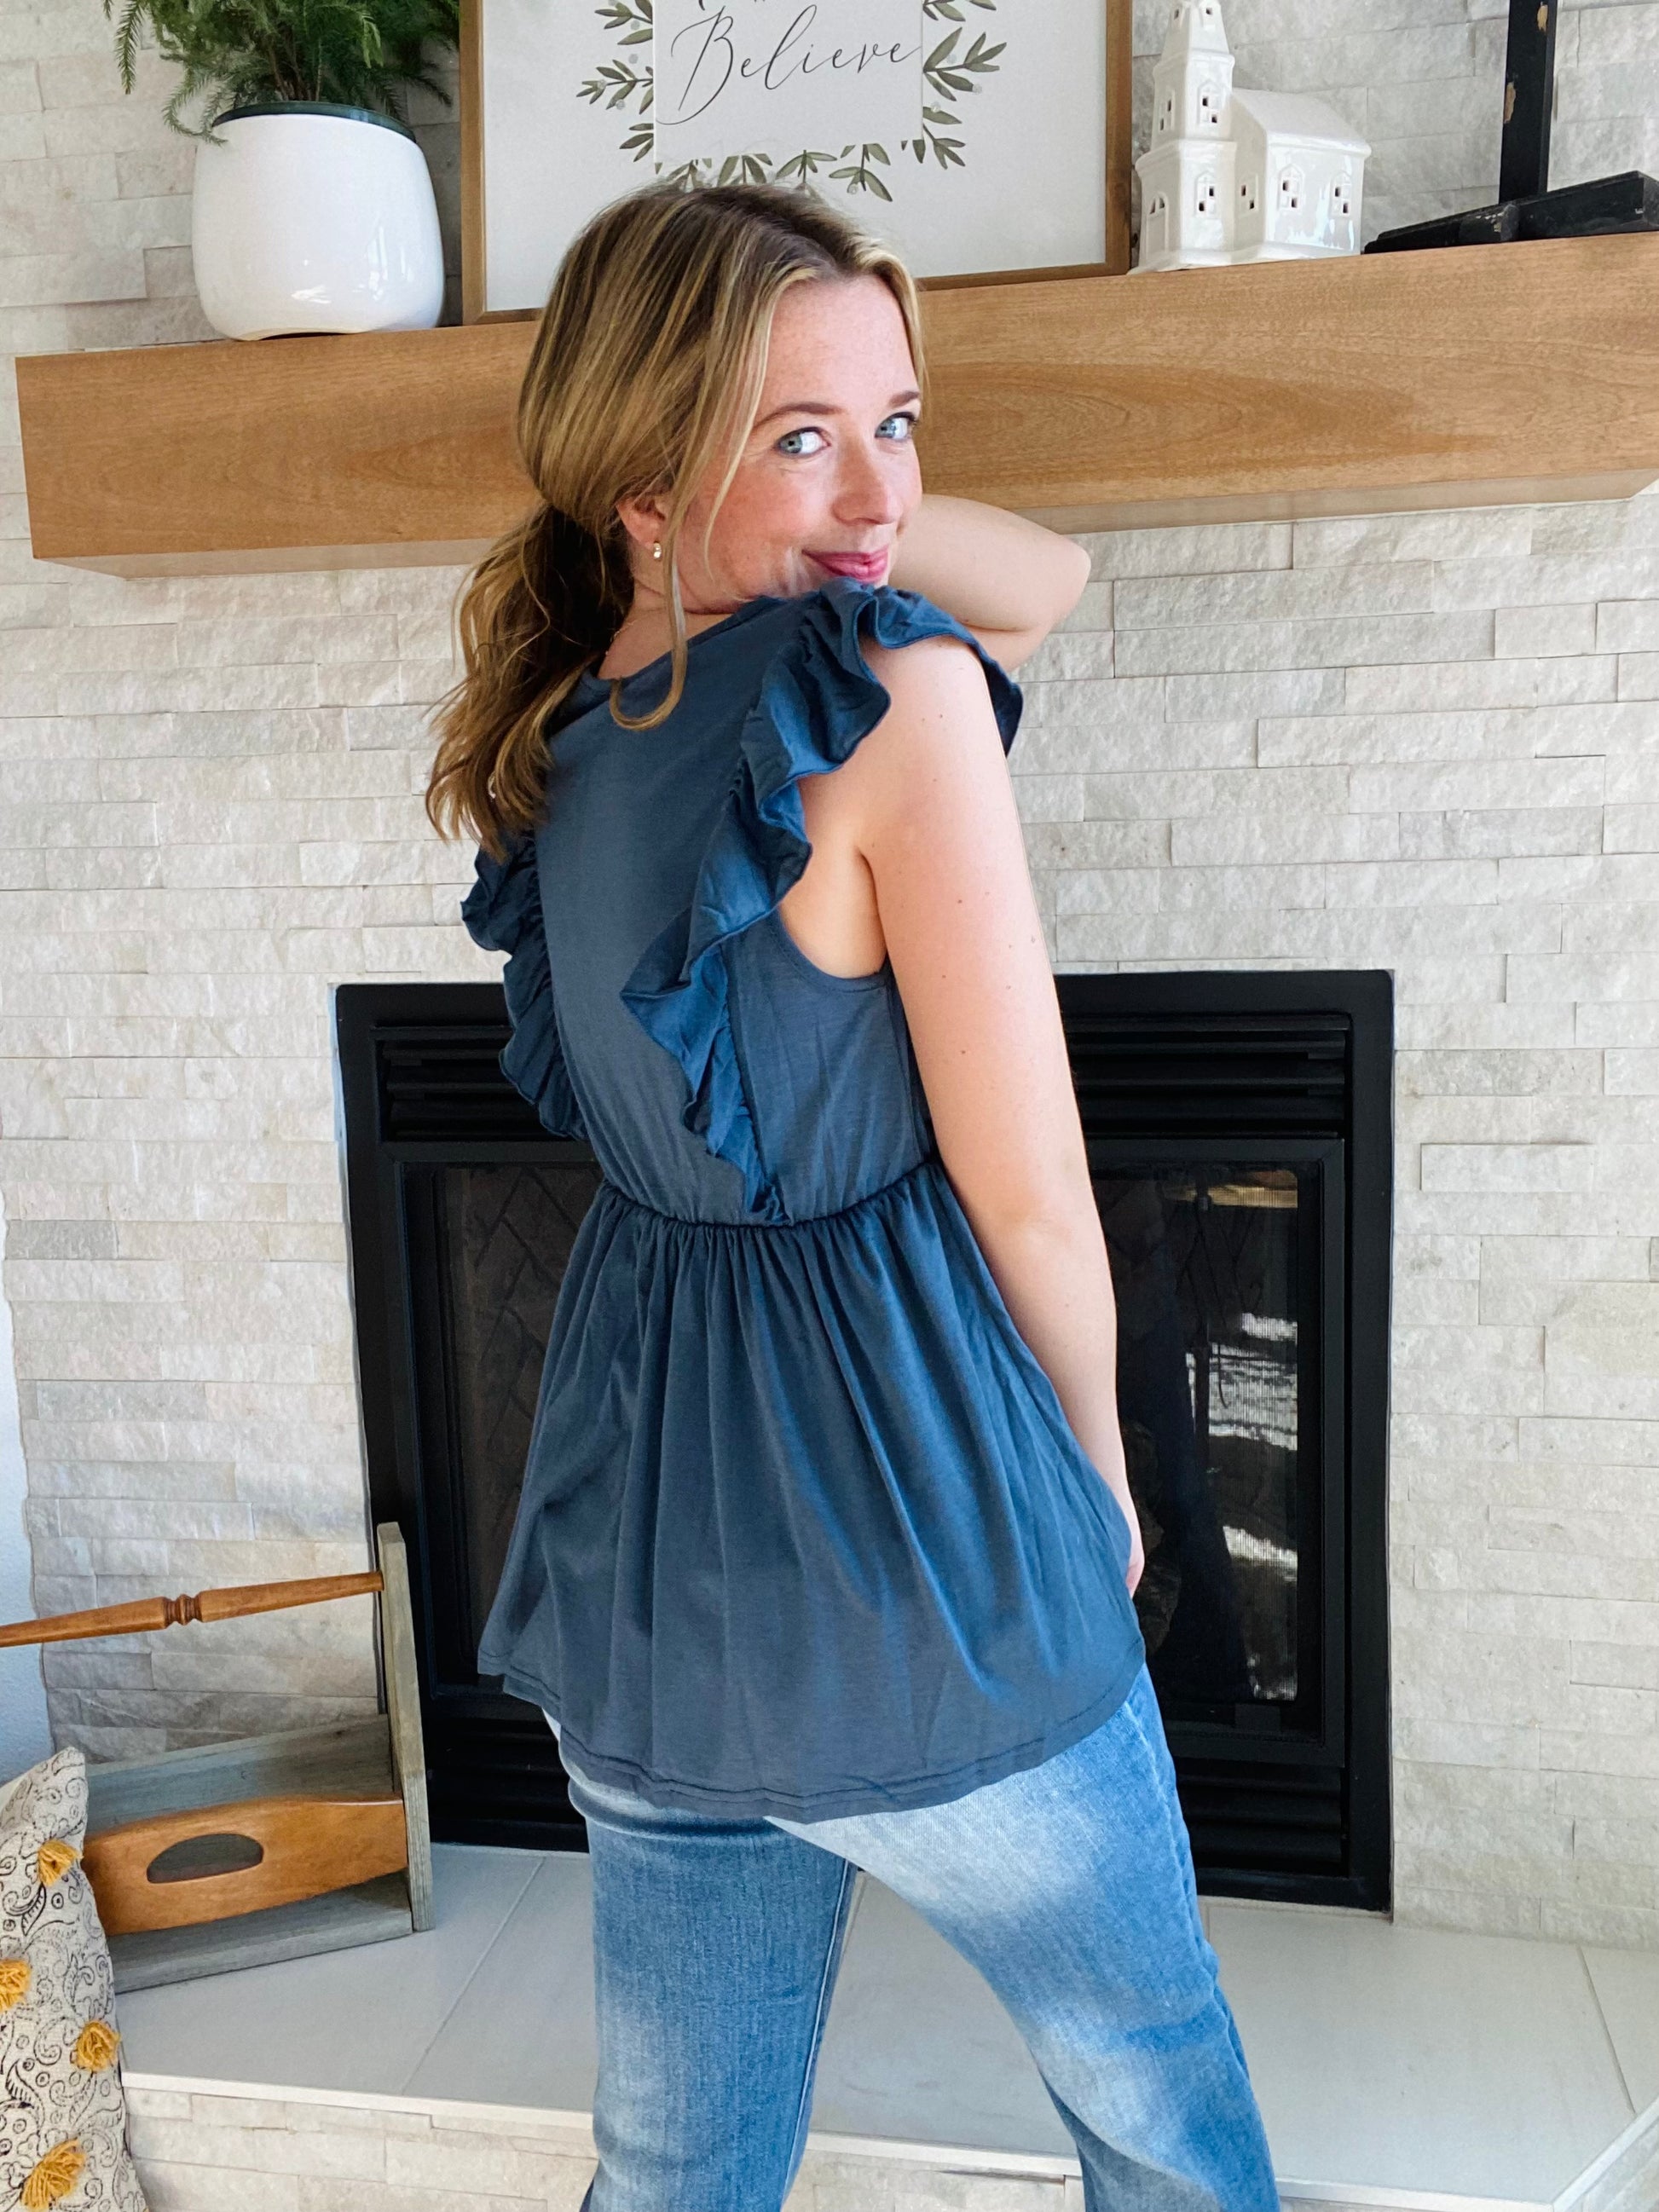 Look fashionable and feel confident wearing this navy ruched peplum tank top. The flattering silhouette is perfect for pairing with light or white denim. Flutter accents add a touch of femininity to the design. It's a great choice for any occasion.